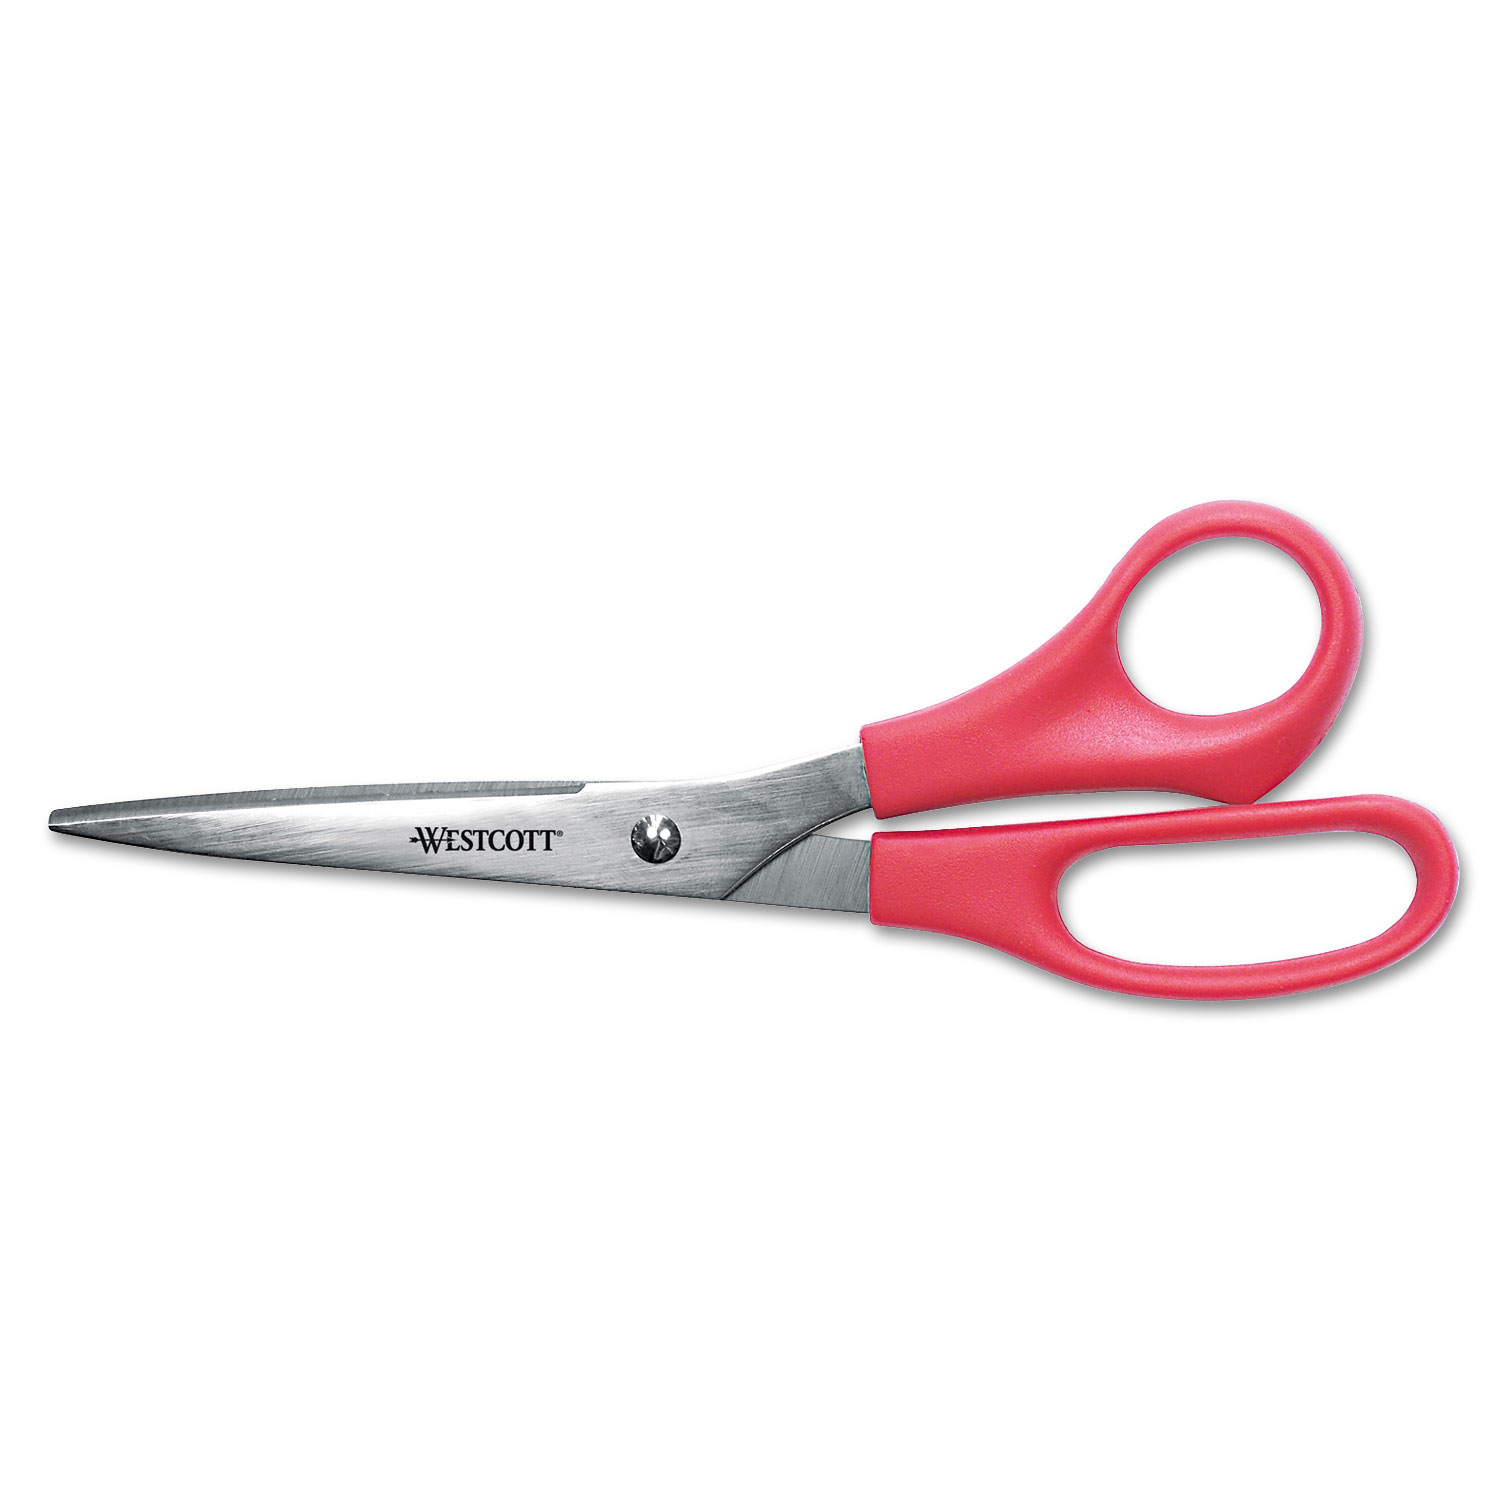  Westcott 40618 Value Line Stainless Steel Shears, 8 Long, 3.5 Cut Length, Red Straight Handle (ACM40618) 